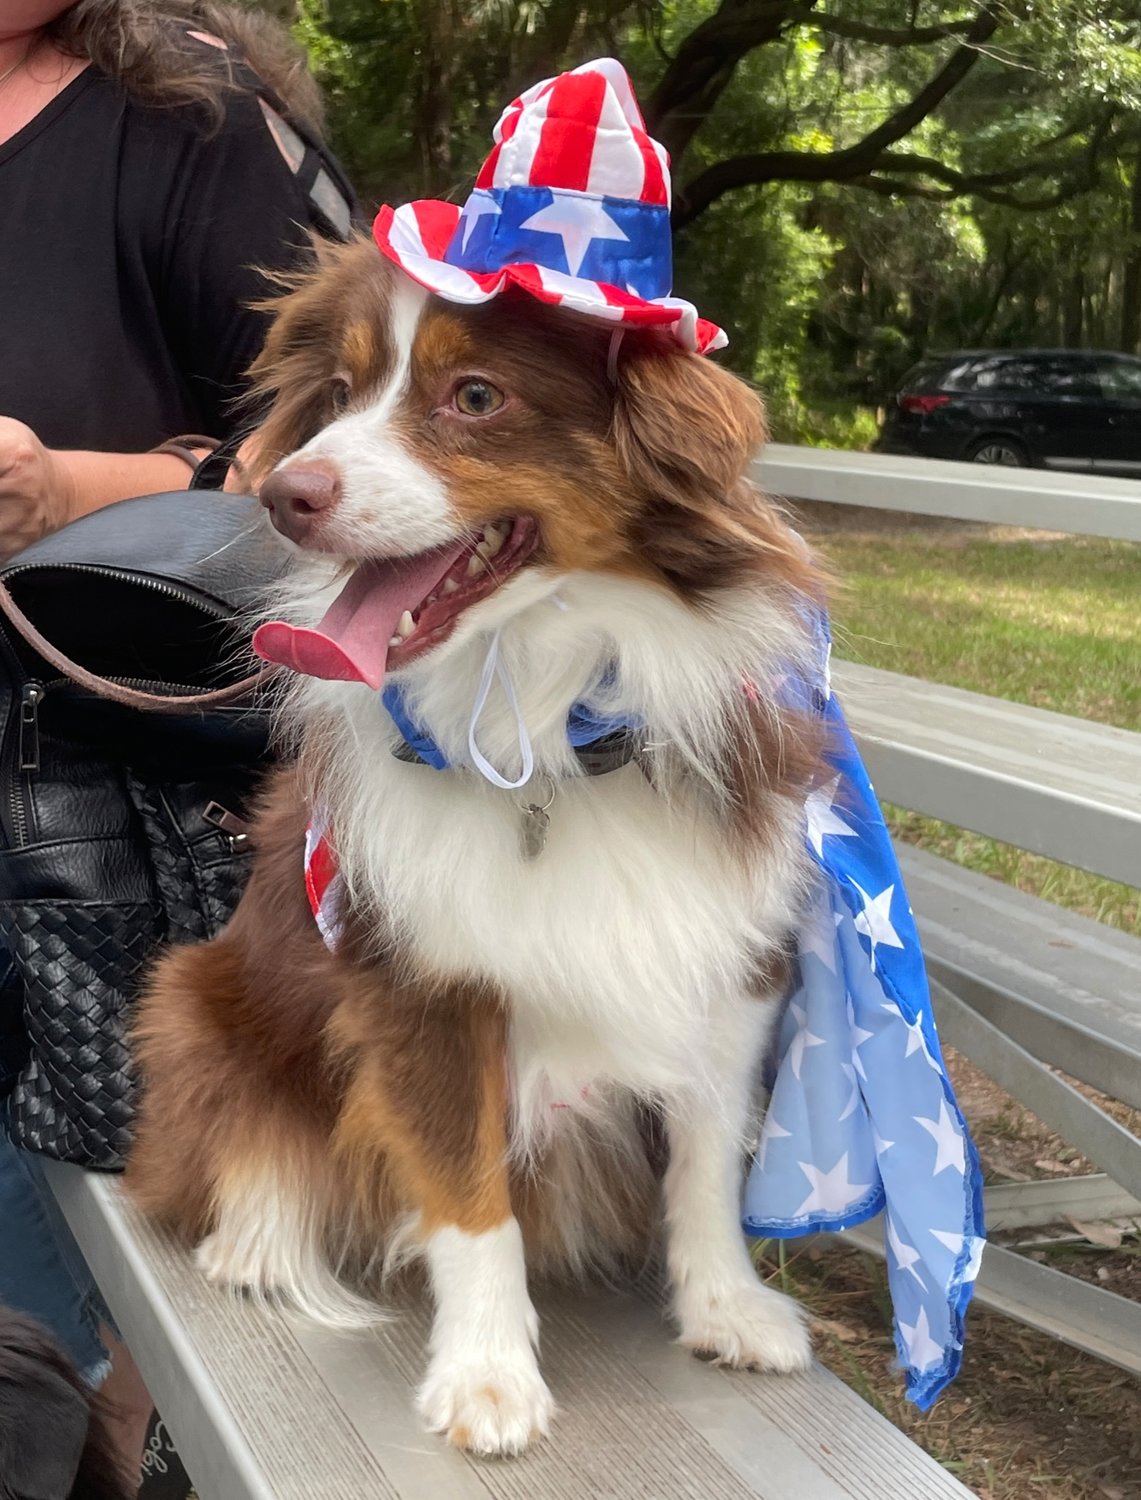 Dogs showed their patriotic flare during the event.